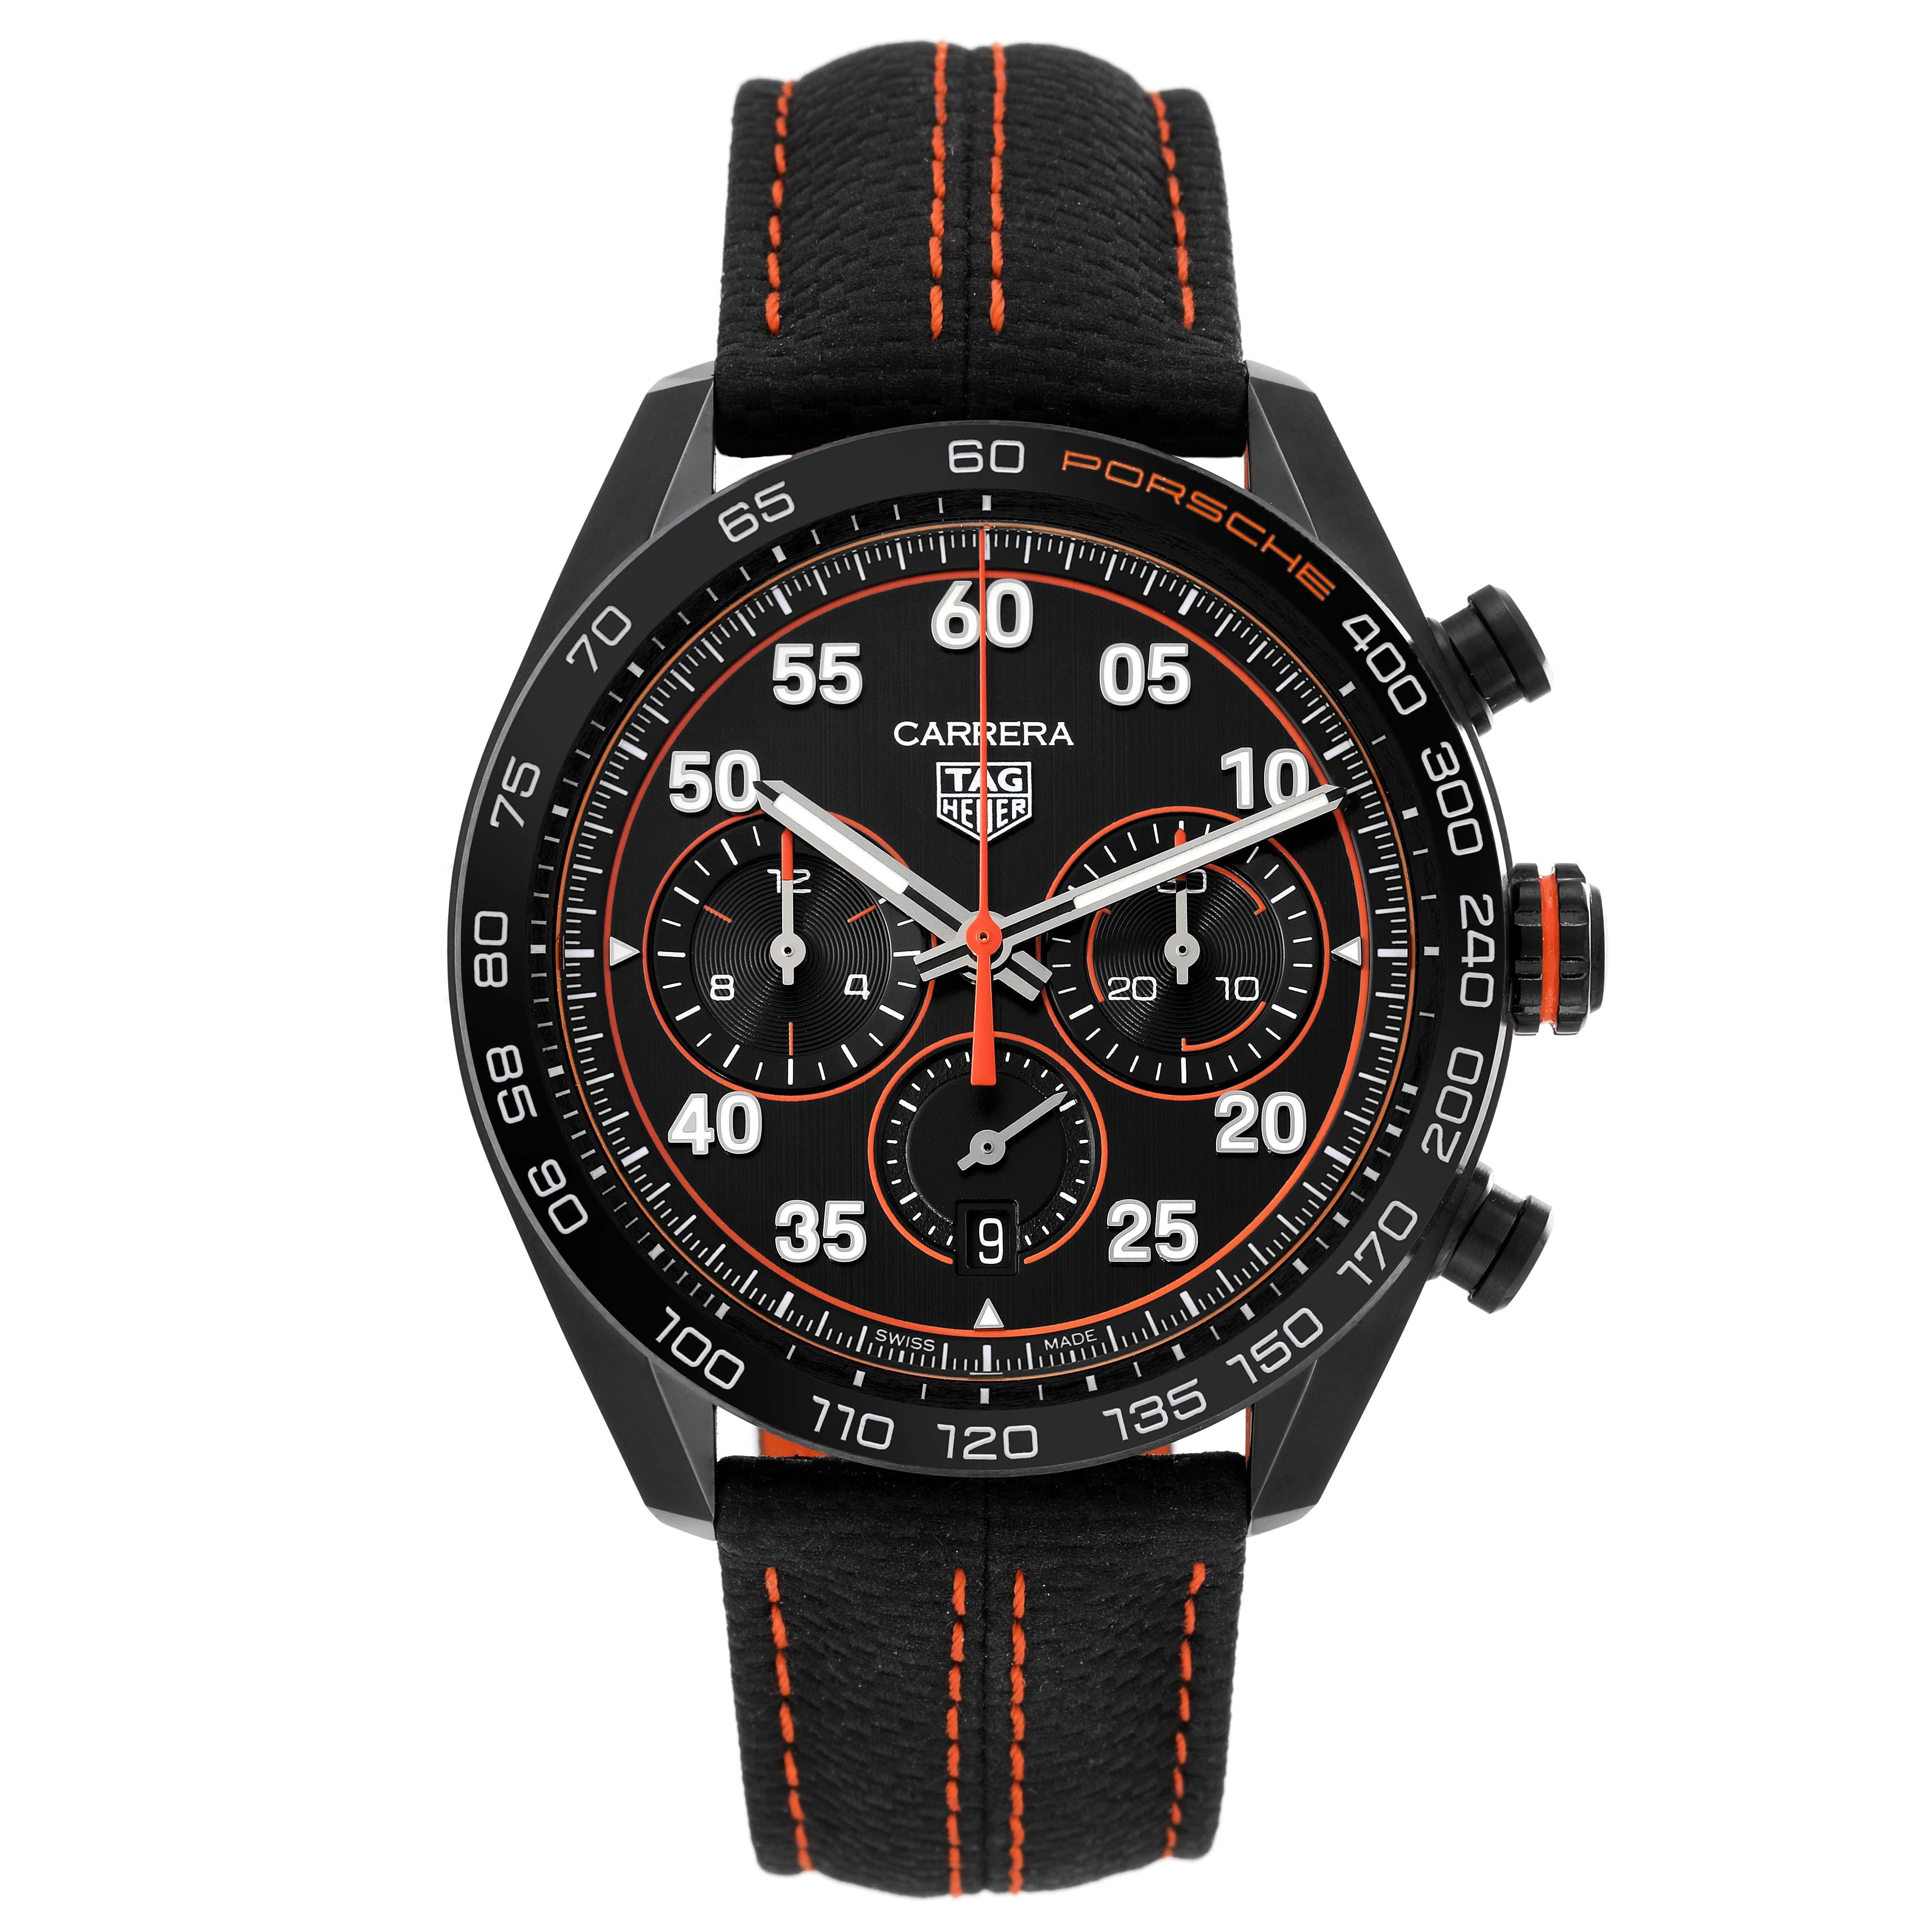 Tag Heuer Carrera Porsche LE Chronograph Steel Mens Watch CBN2A1M Unworn. Automatic self-winding chronograph movement. DLC coated stainless steel round case 44.0 mm. Transparent exhibition sapphire crystal case back. Black ceramic tachymeter scale